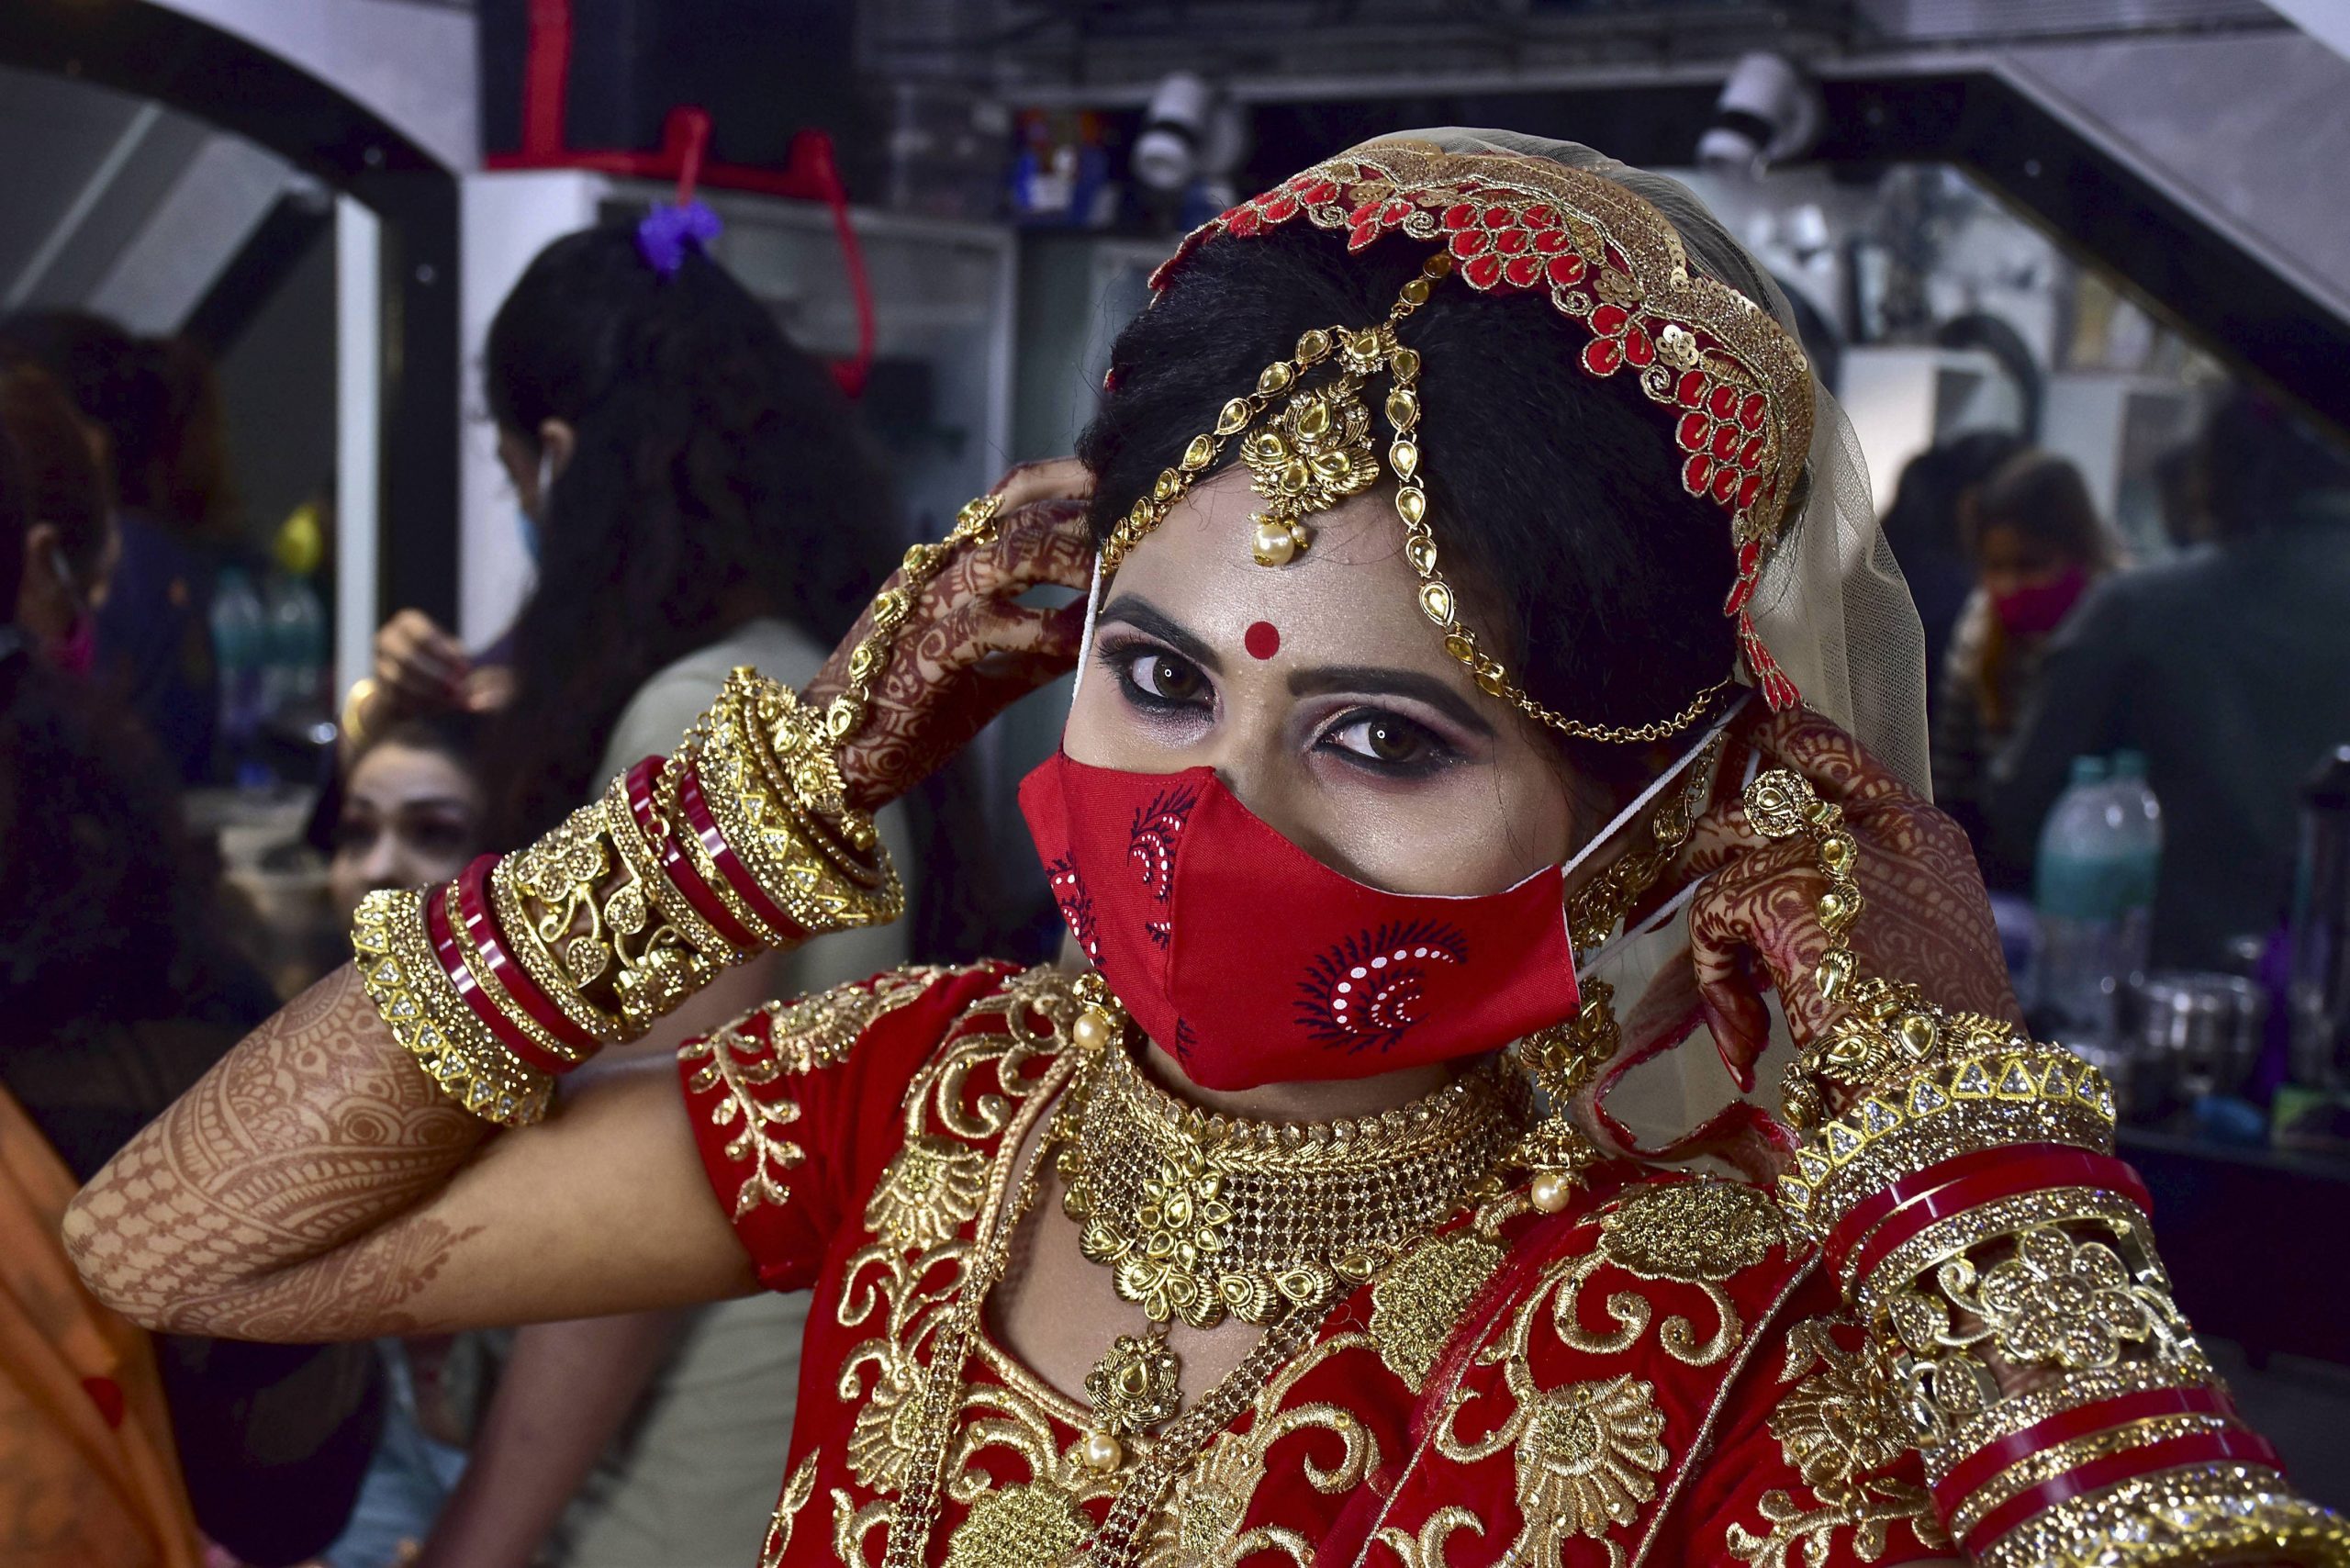 Not your usual Indian bride: TN woman performs martial arts at her wedding